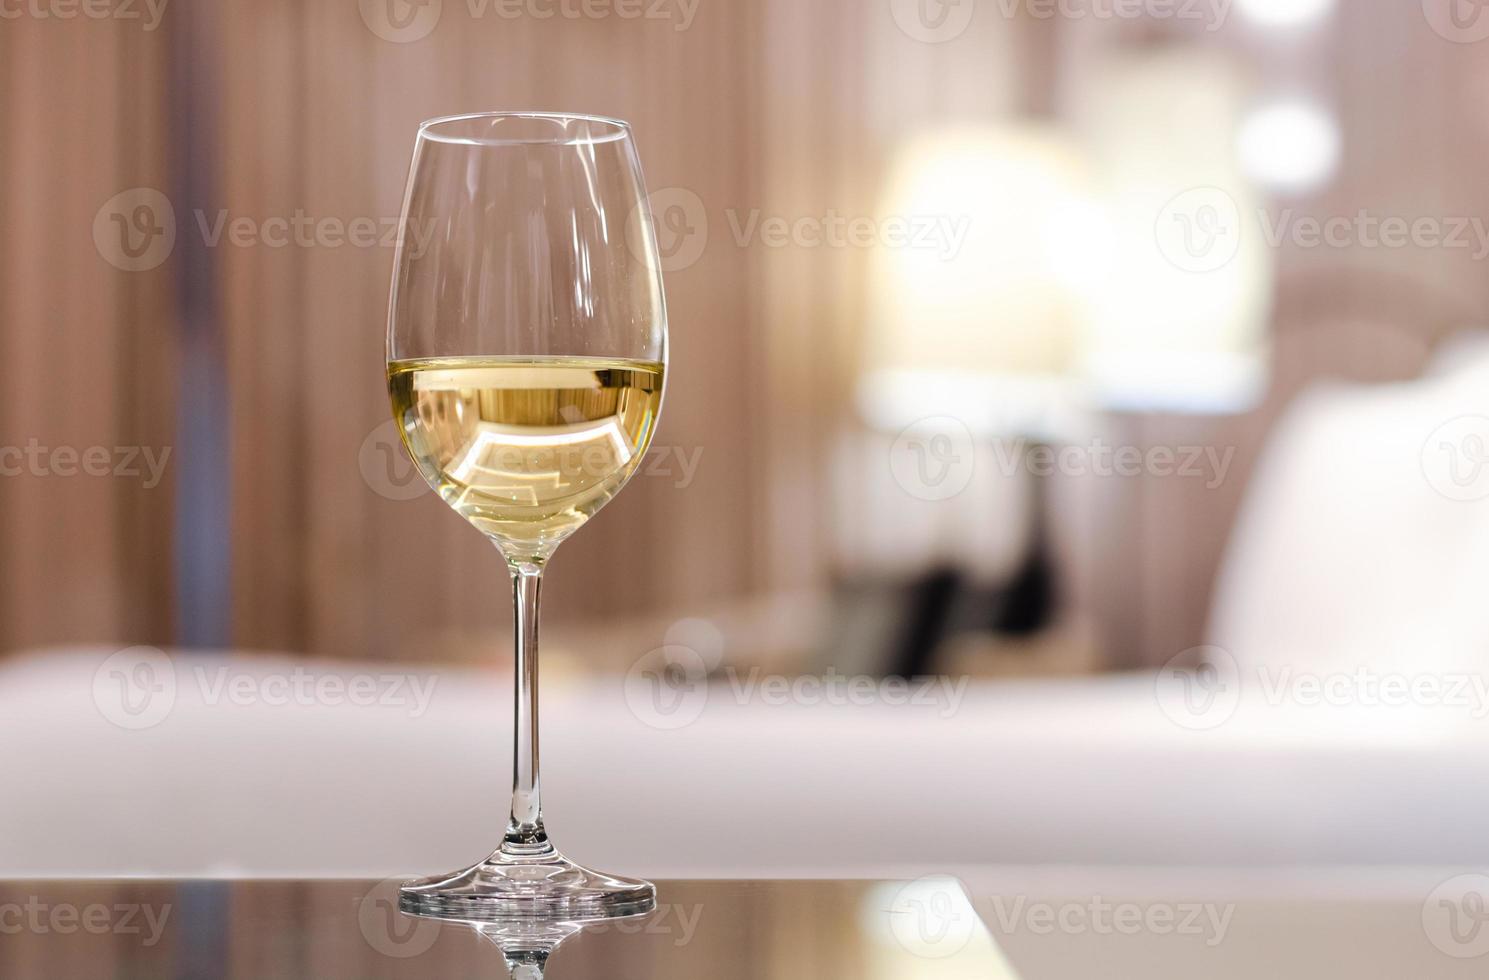 A glass of white wine puts on table in bed room. Relaxing at home concept. photo